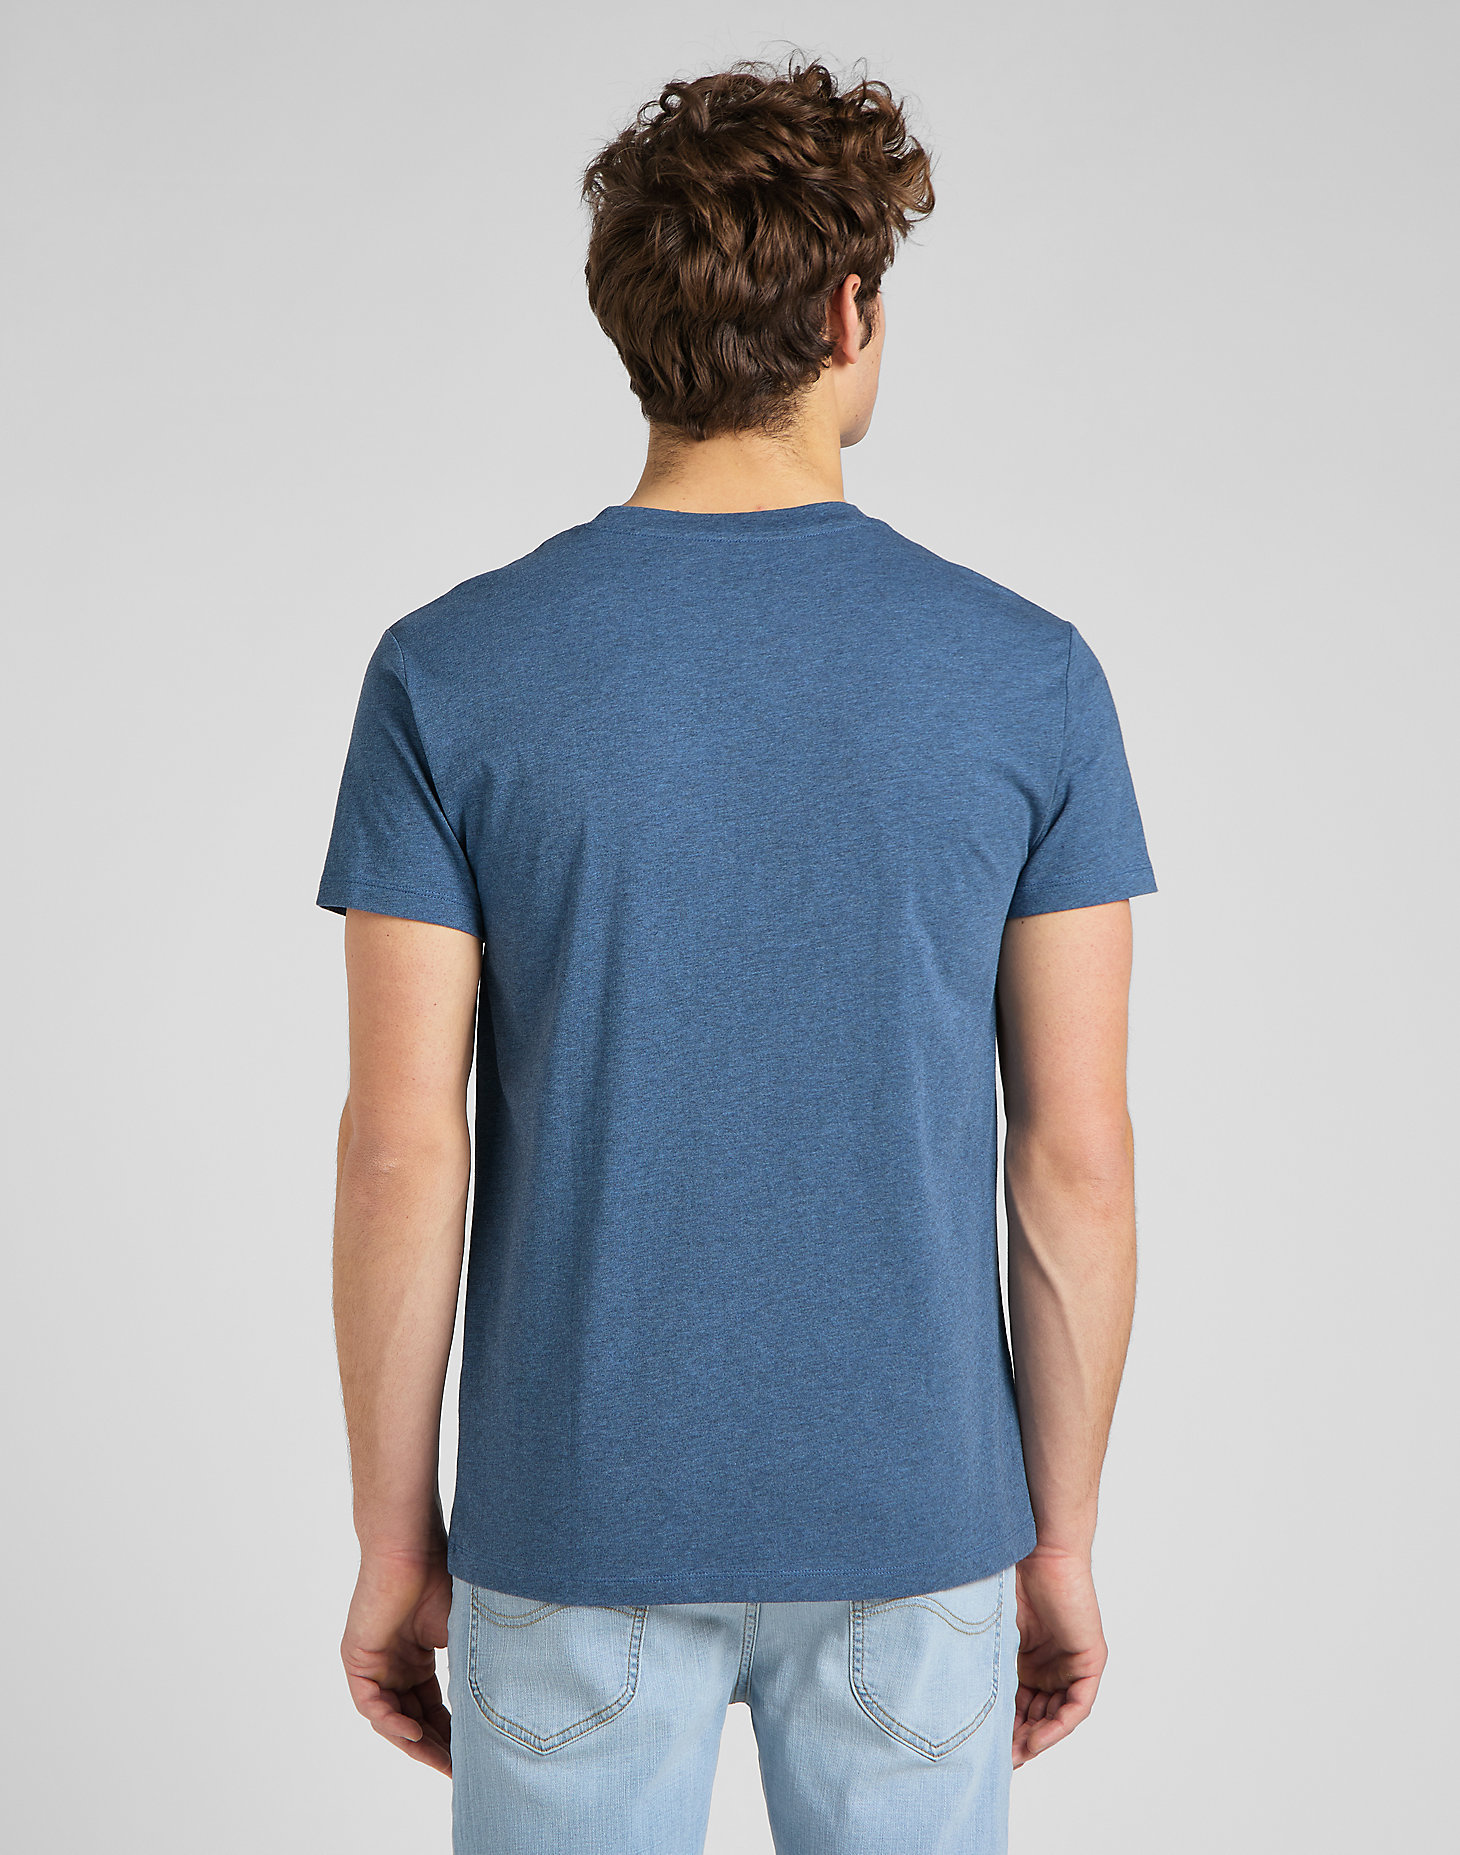 Ultimate Pocket Tee in Blue Union alternative view 1